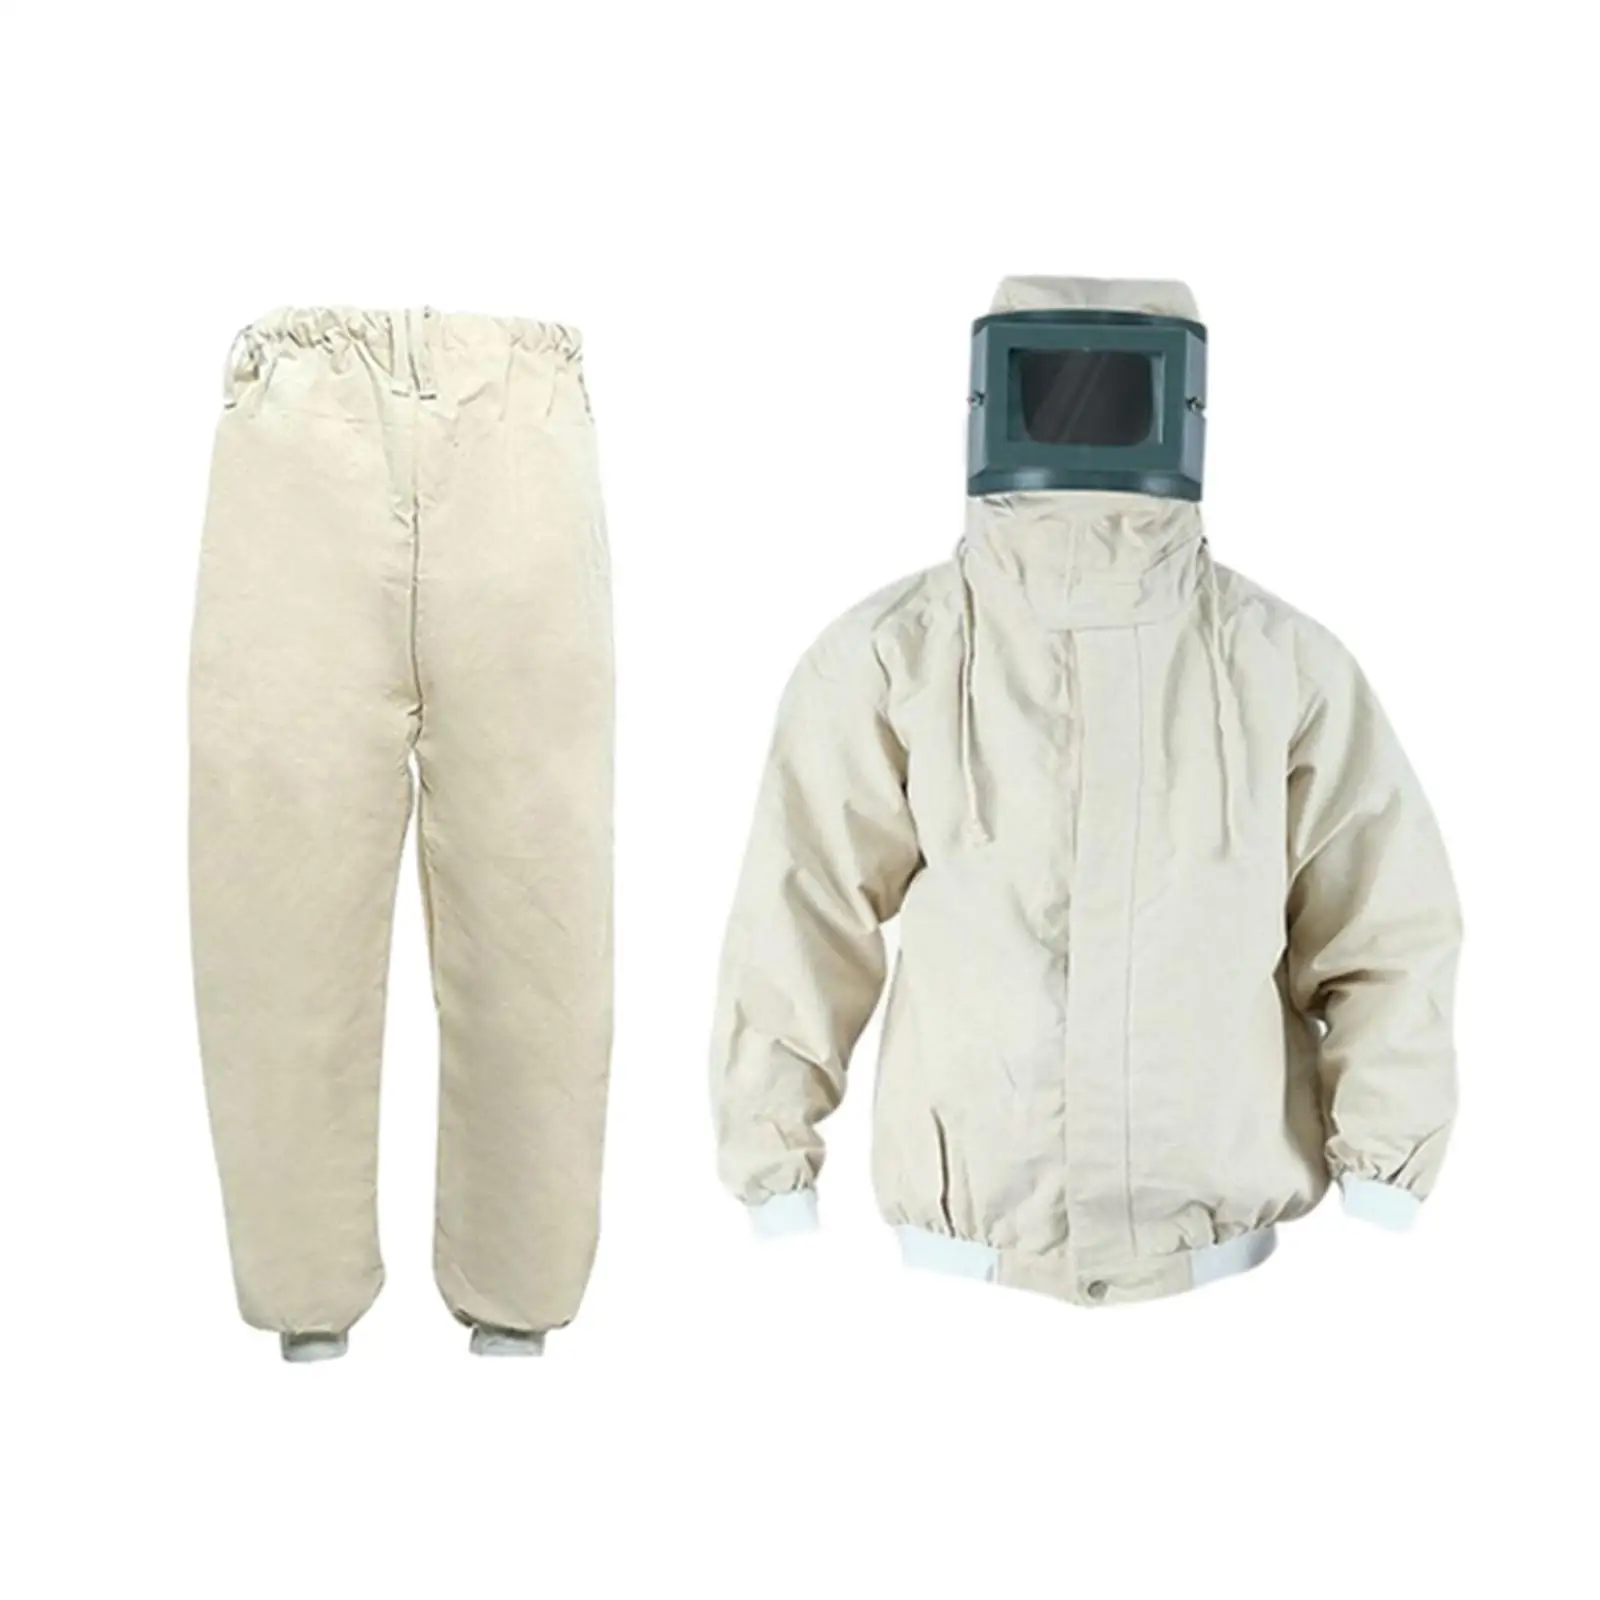 Protective Coveralls Professional Safety Work Overalls Sandblasting Clothing for Woodworking